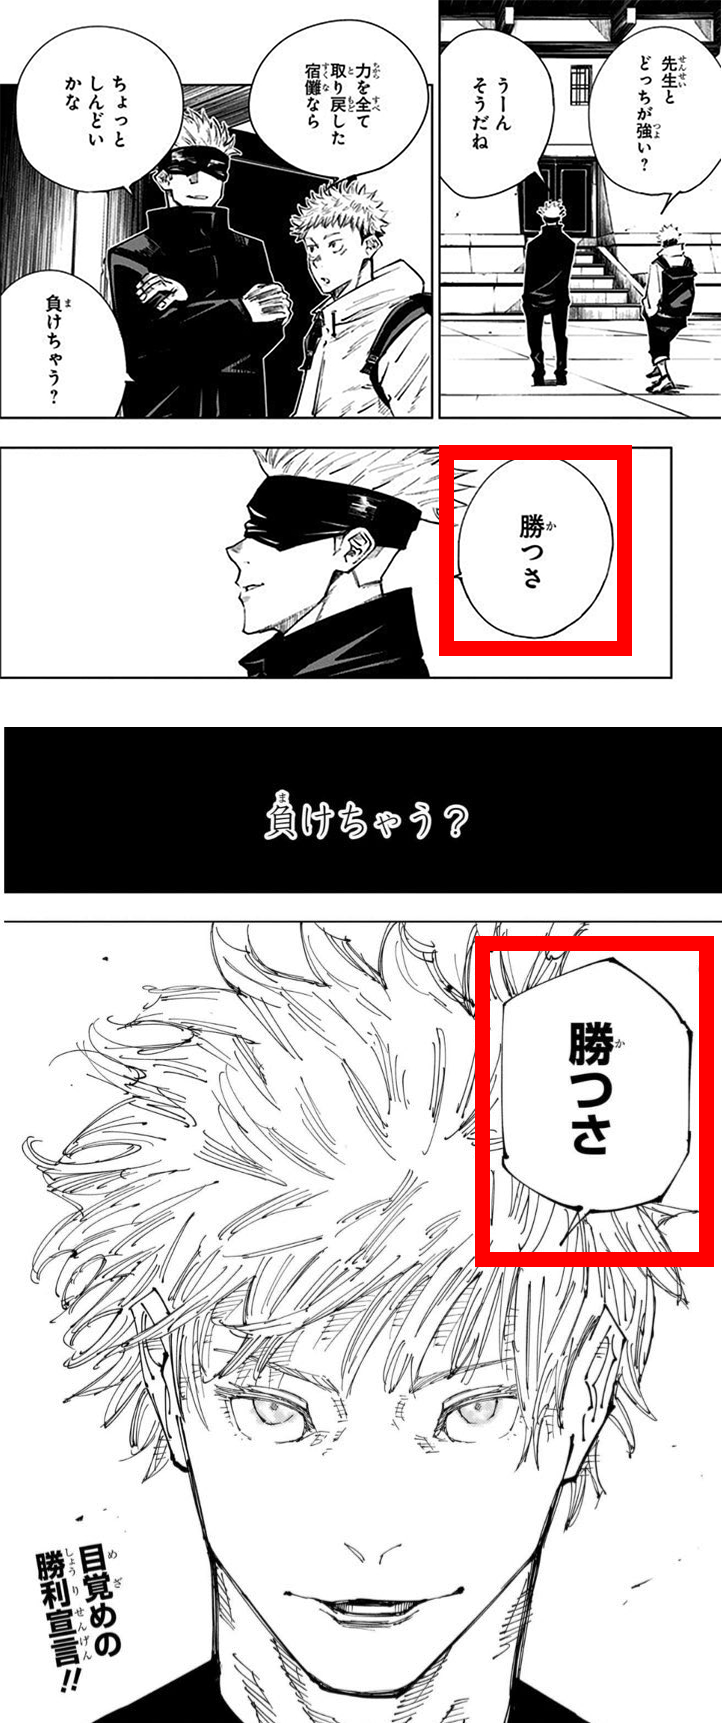 A comparison of Satoru Gojo's respective responses to Yuji and Psuedo-Geto in the Japanese releases of Ch. 3 "For Myself" and Ch. 221 "Gain and Loss" shows the sorcerer used the exact same phrasing in both conversations.